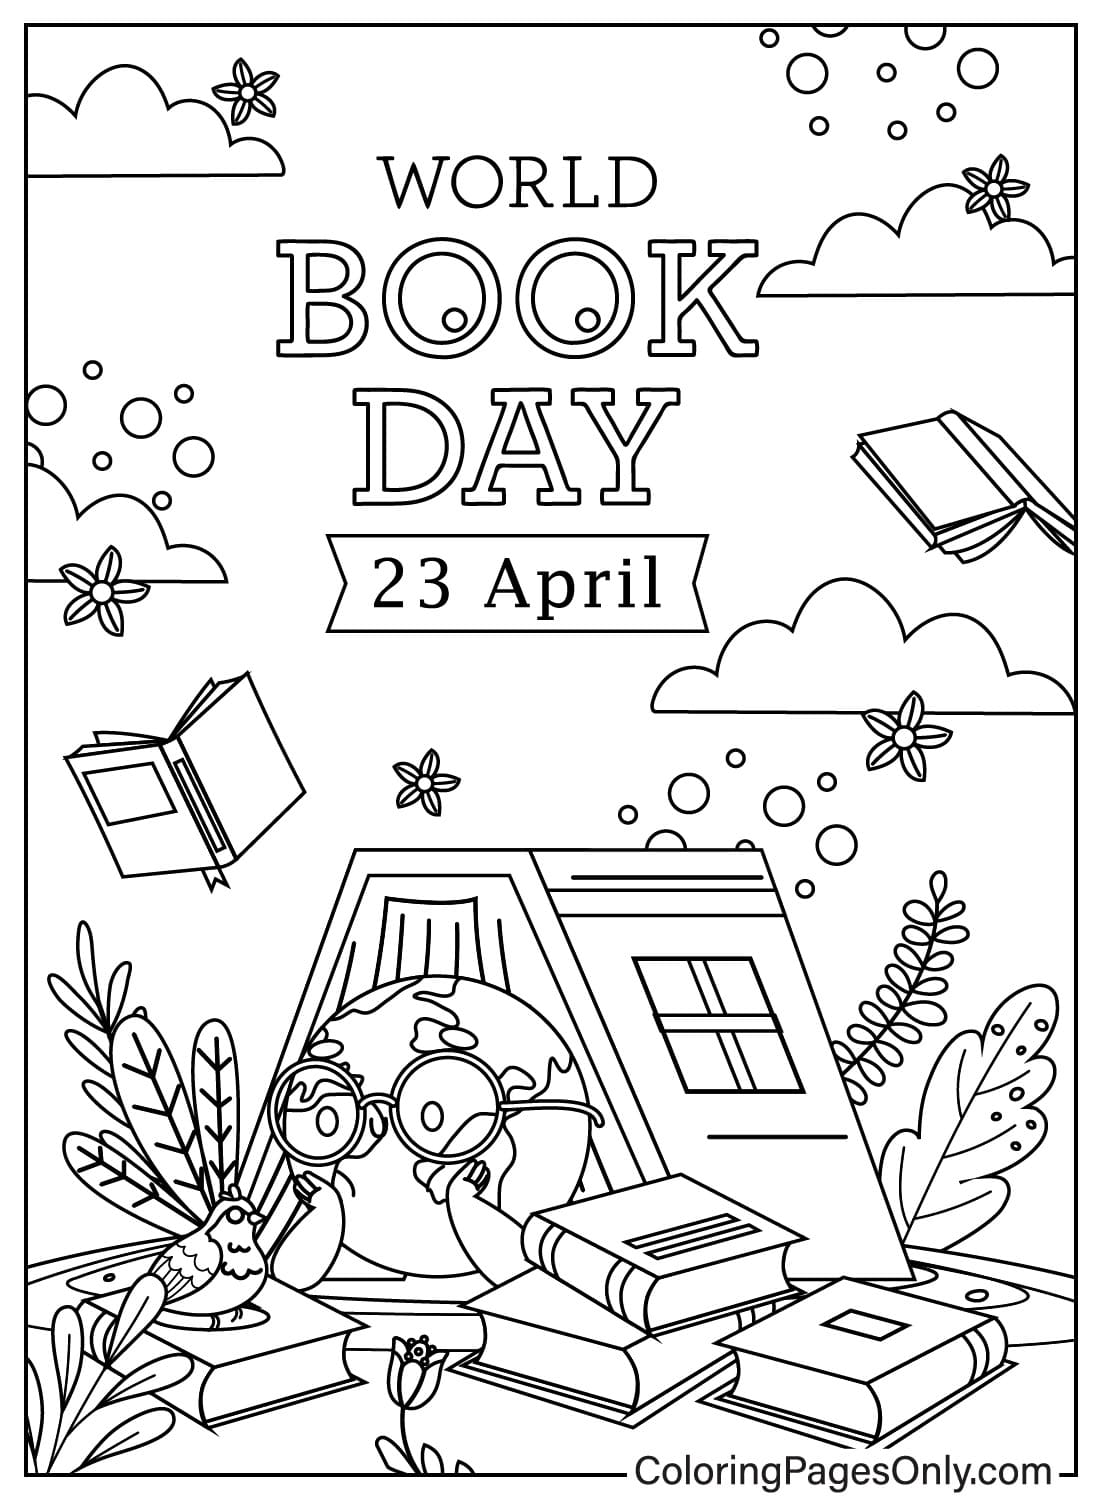 Pictures World Book Day Coloring Page from World Book Day